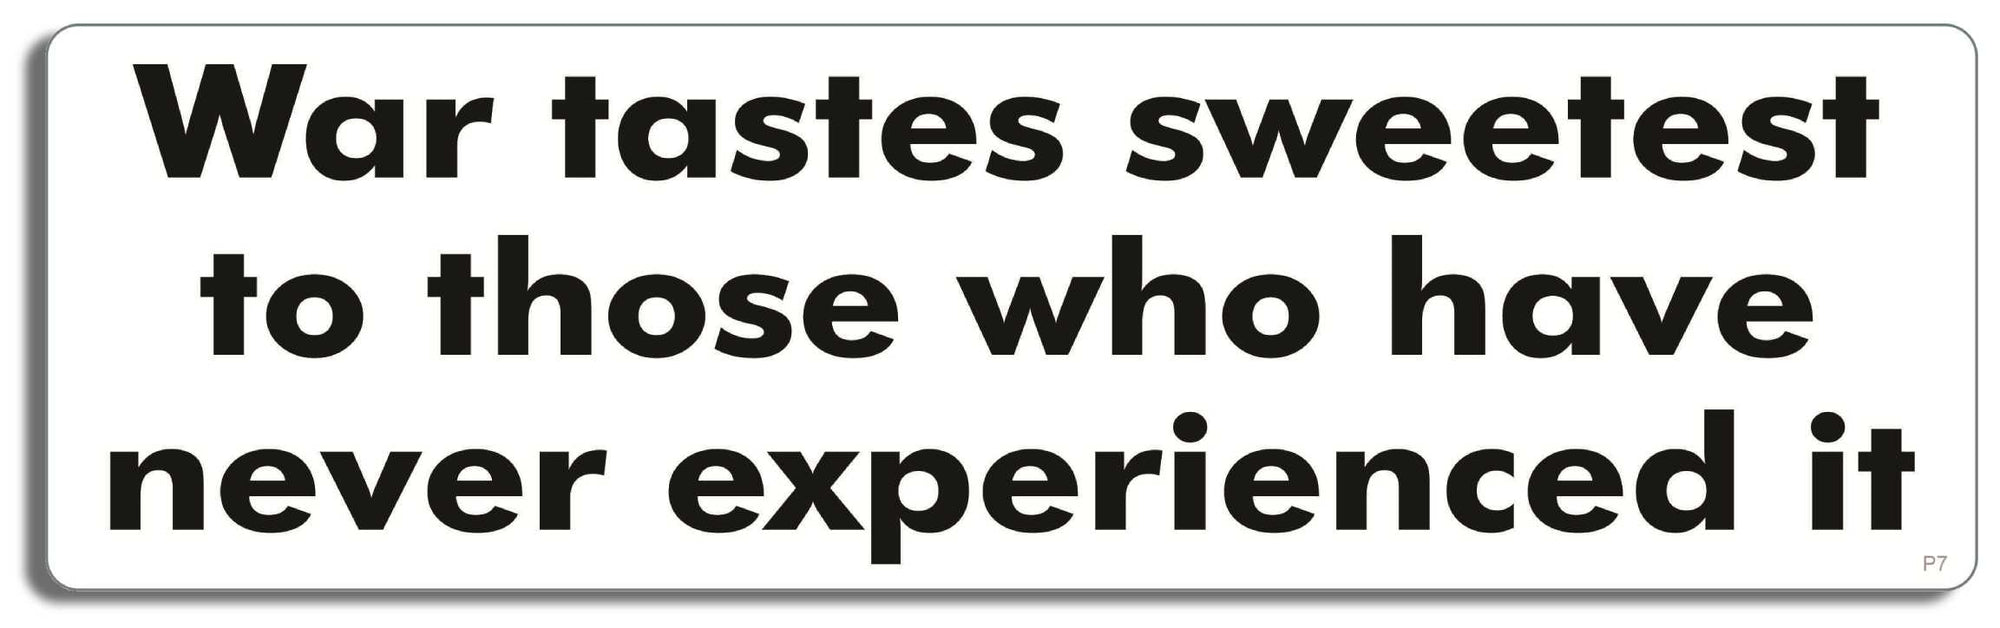 War tastes sweetest to Those who have never experienced it - 3" x 10" Bumper Sticker--Car Magnet- -  Decal Bumper Sticker-political Bumper Sticker Car Magnet War tastes sweetest to Those who-  Decal for carsliberal, Political